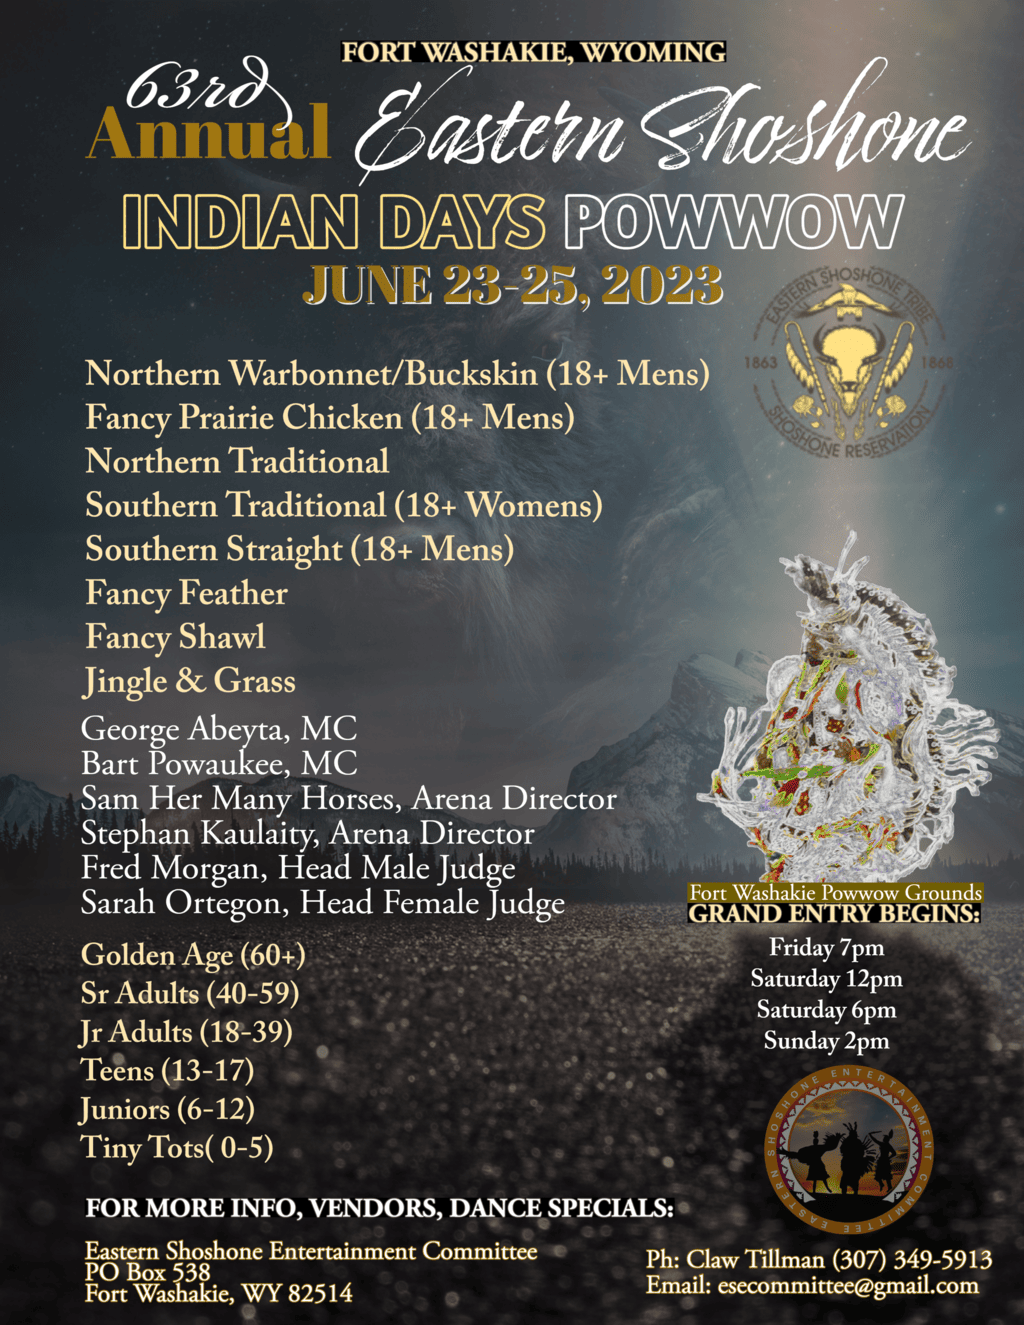 63rd Annual Eastern Shoshone Indian Days Pow Wow 2023